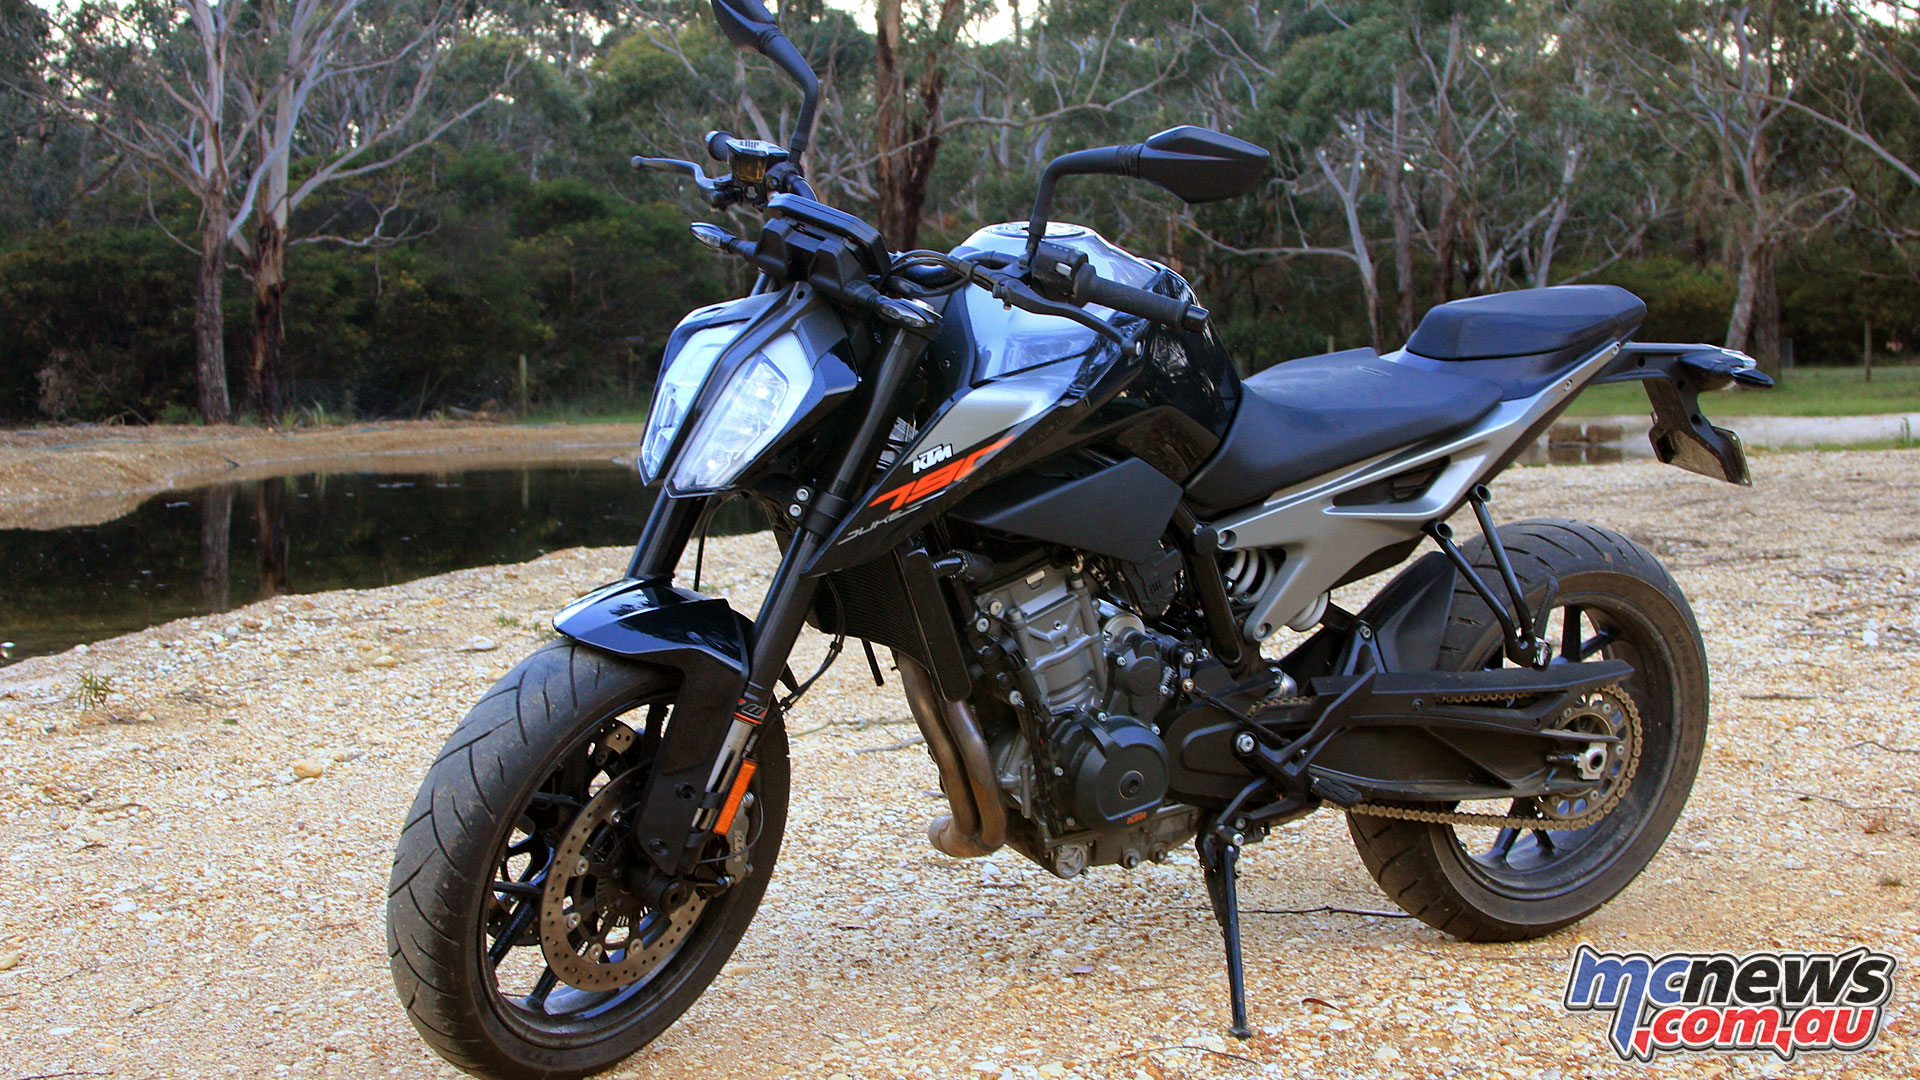 2019 Ktm 790 Duke Motorcycle Review Mcnews Com Au Motorcycle News Sport And Reviews